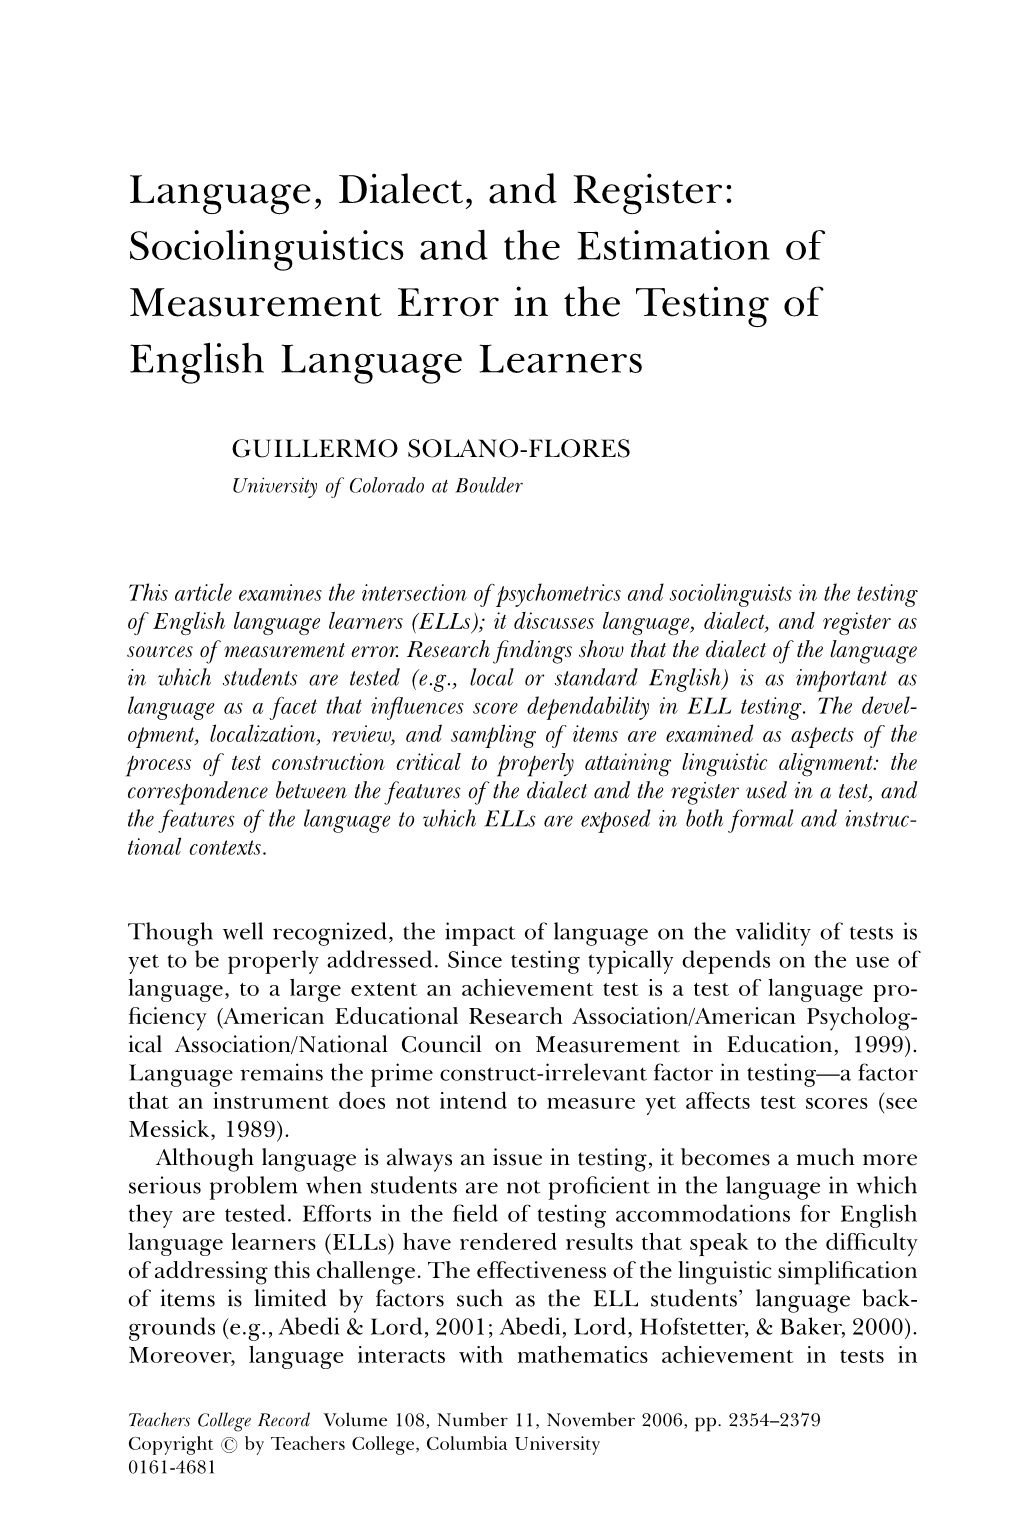 Language, Dialect, and Register: Sociolinguistics and the Estimation of Measurement Error in the Testing of English Language Learners